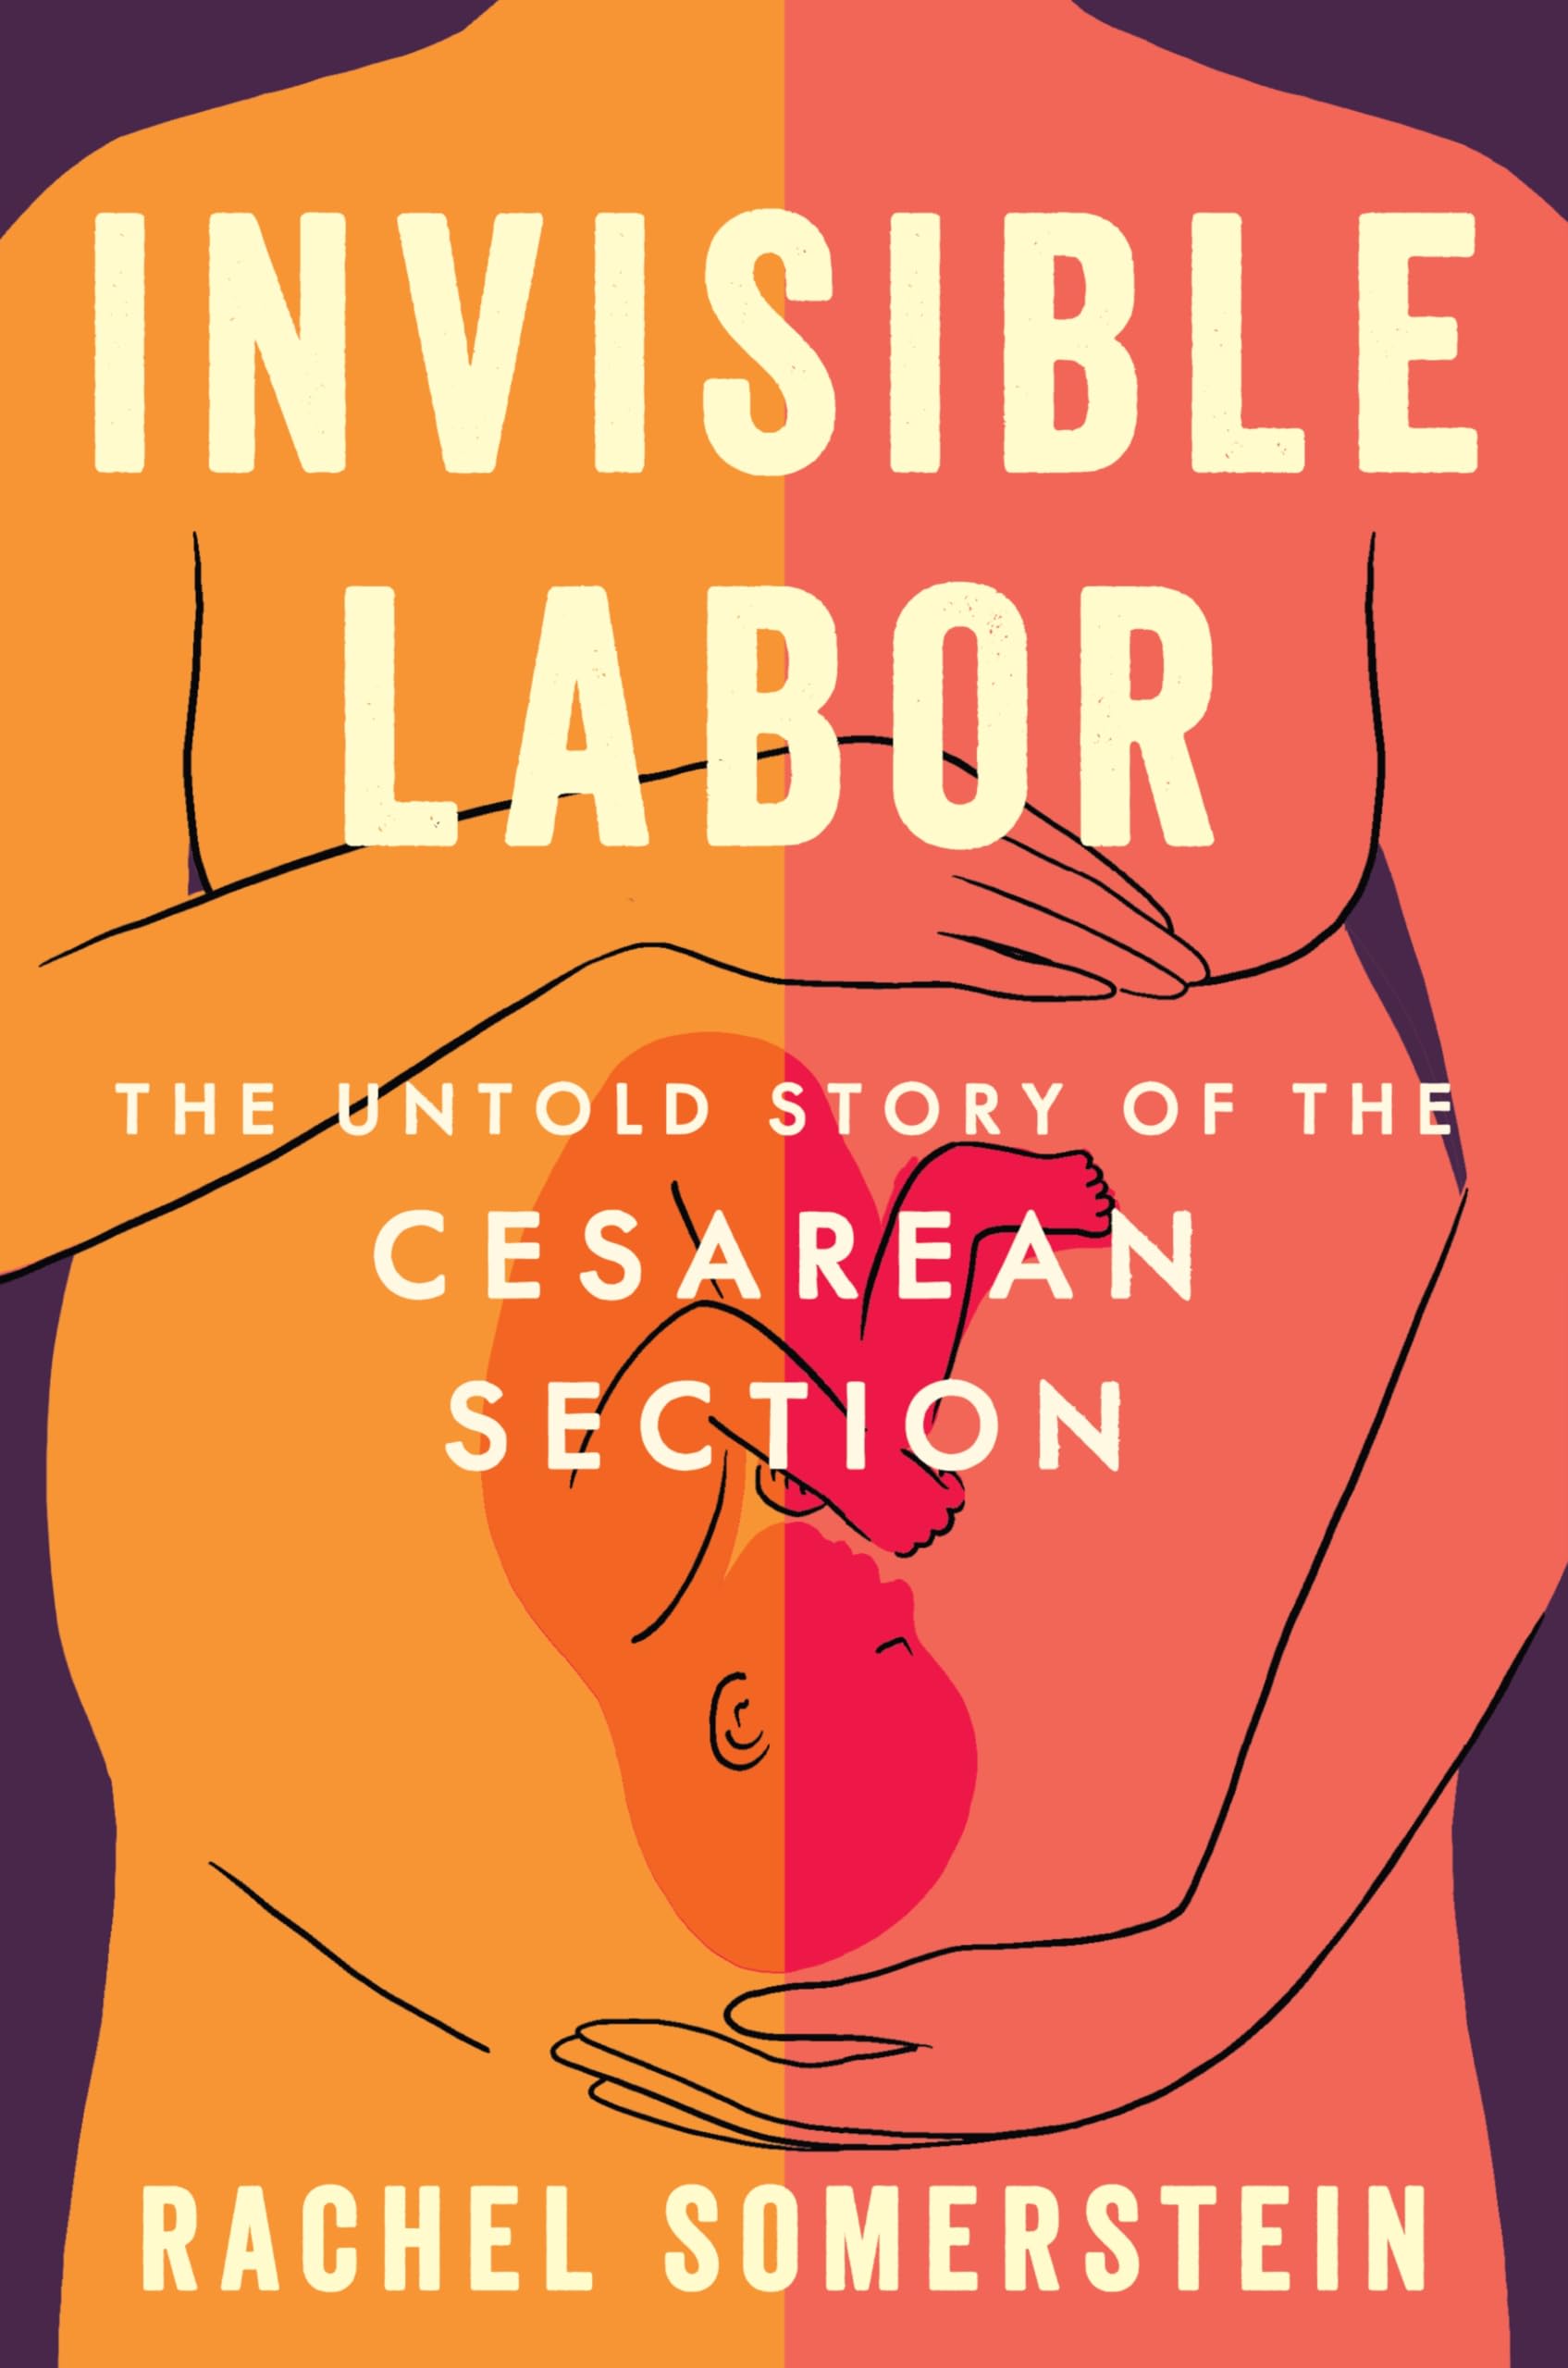 Invisible Labor: The Untold Story of the Cesarean Section